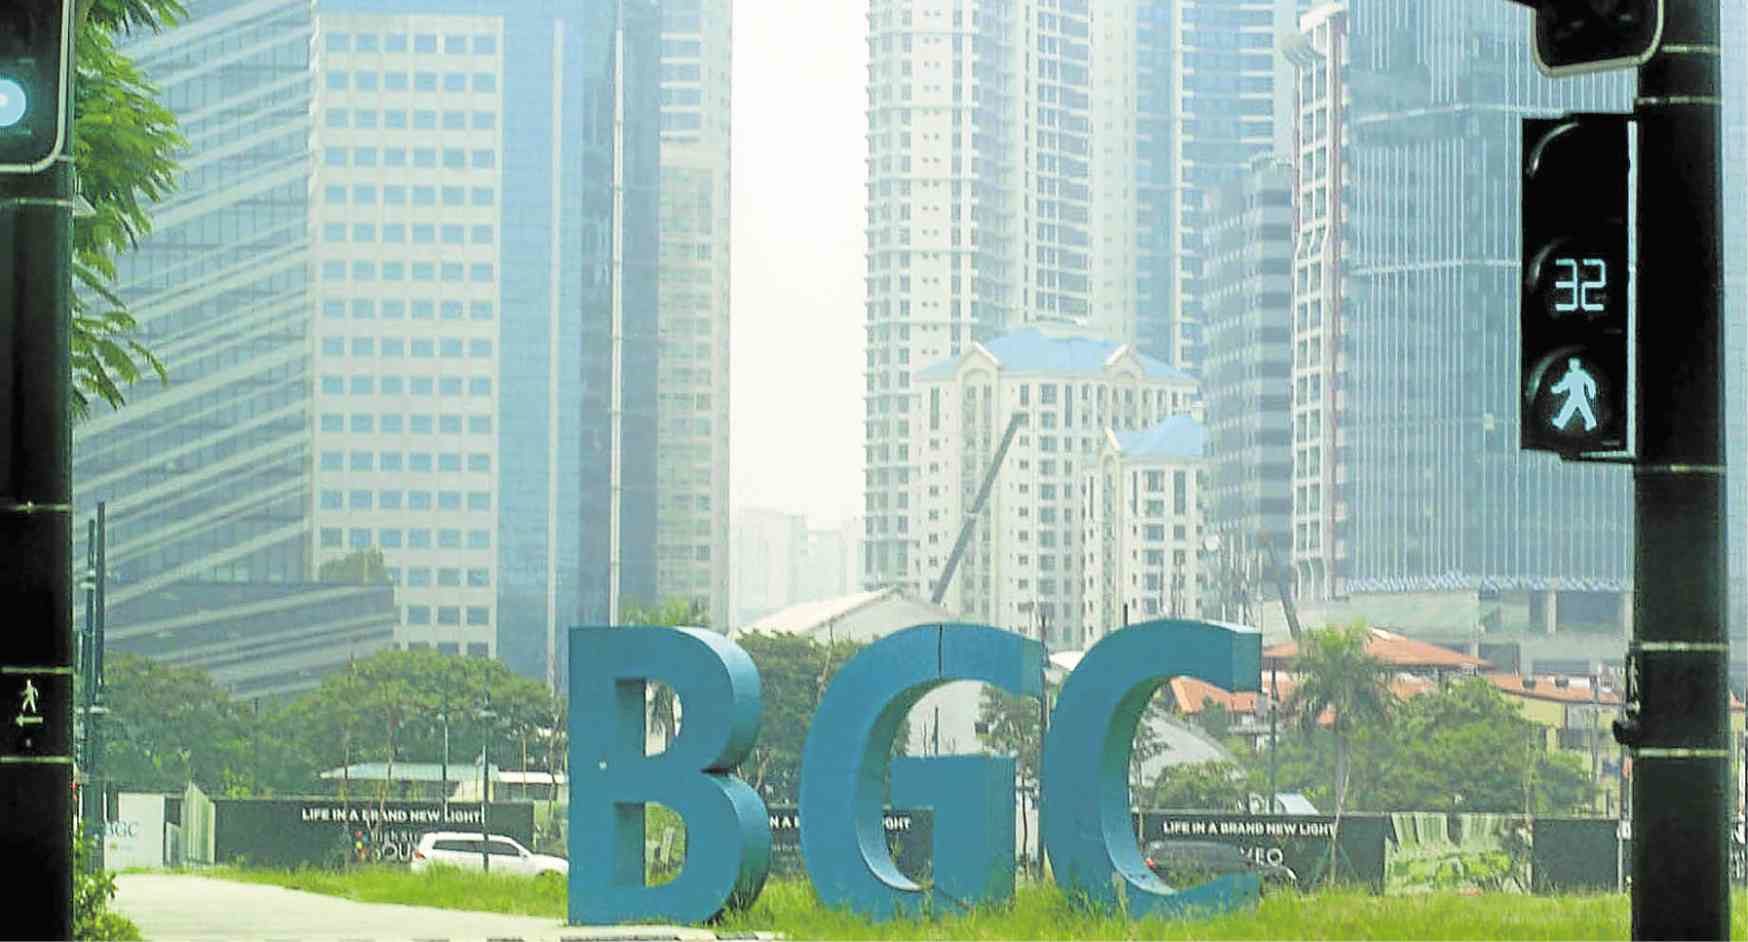 The Taguig City Police on Wednesday denied reports of an increasing robbery incidents in Bonifacio Global City. taguig chinese bgc